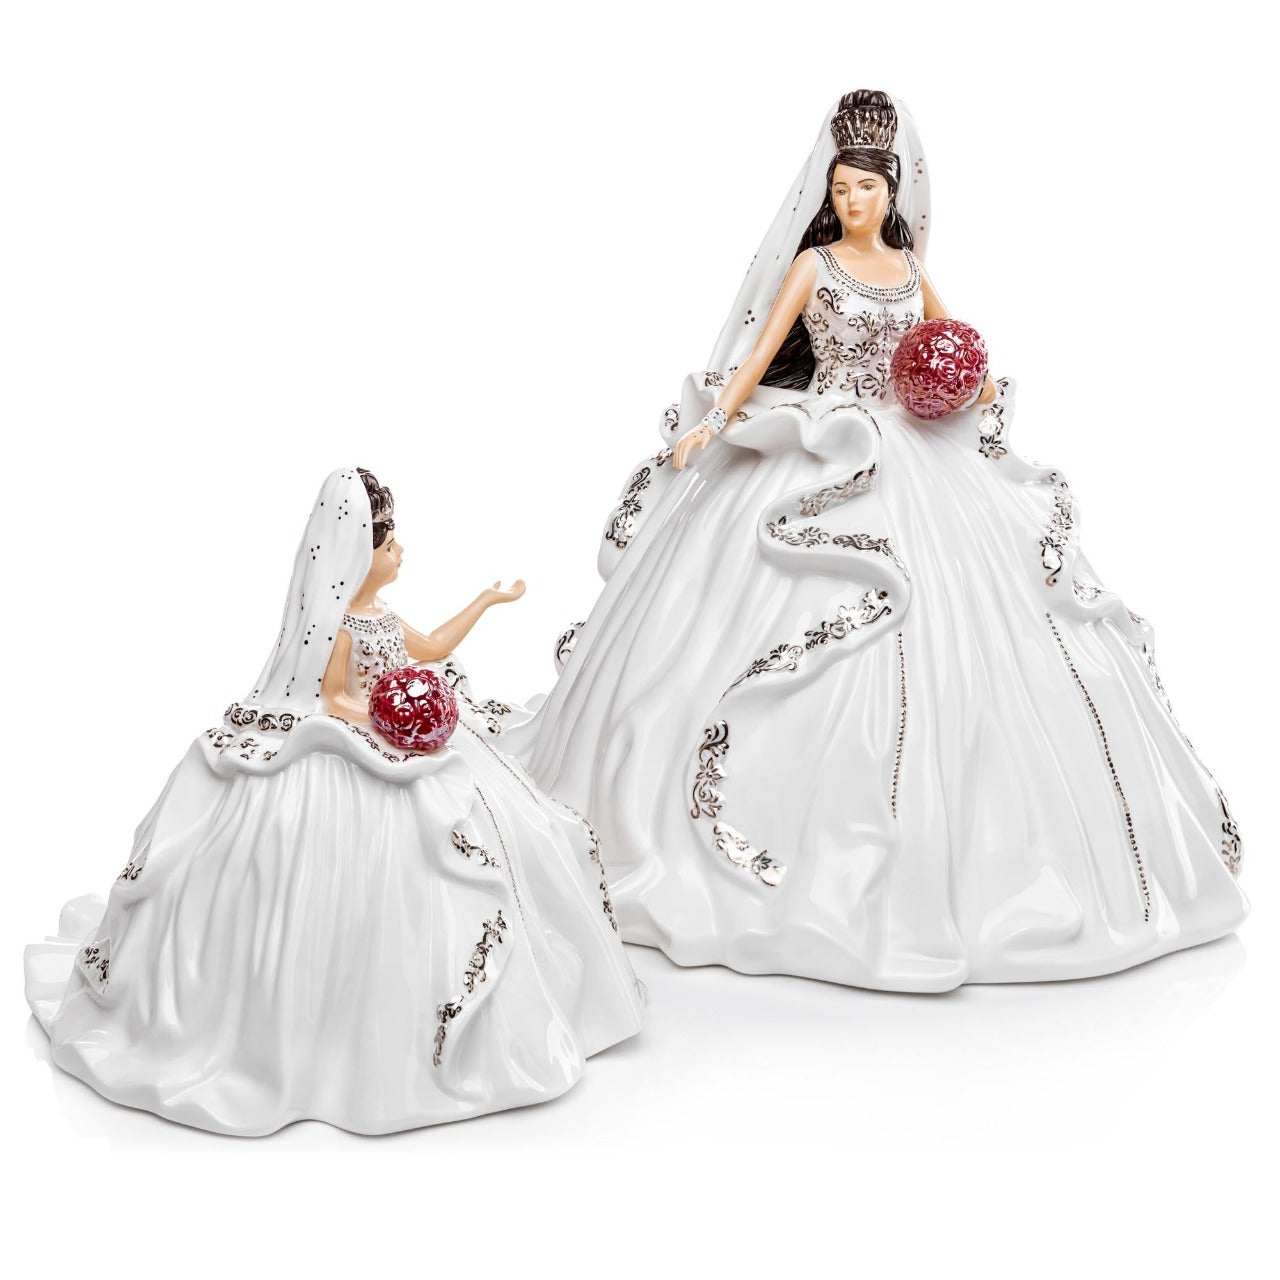 English Ladies Mini Gypsy Affection Brunette  Gypsy Affection is the latest edition to the range and comes in both blonde and brunette and also in mini-figures. This gorgeous figurine stands out from the crowd with stunning gold details throughout the dress and on her beautiful crown.